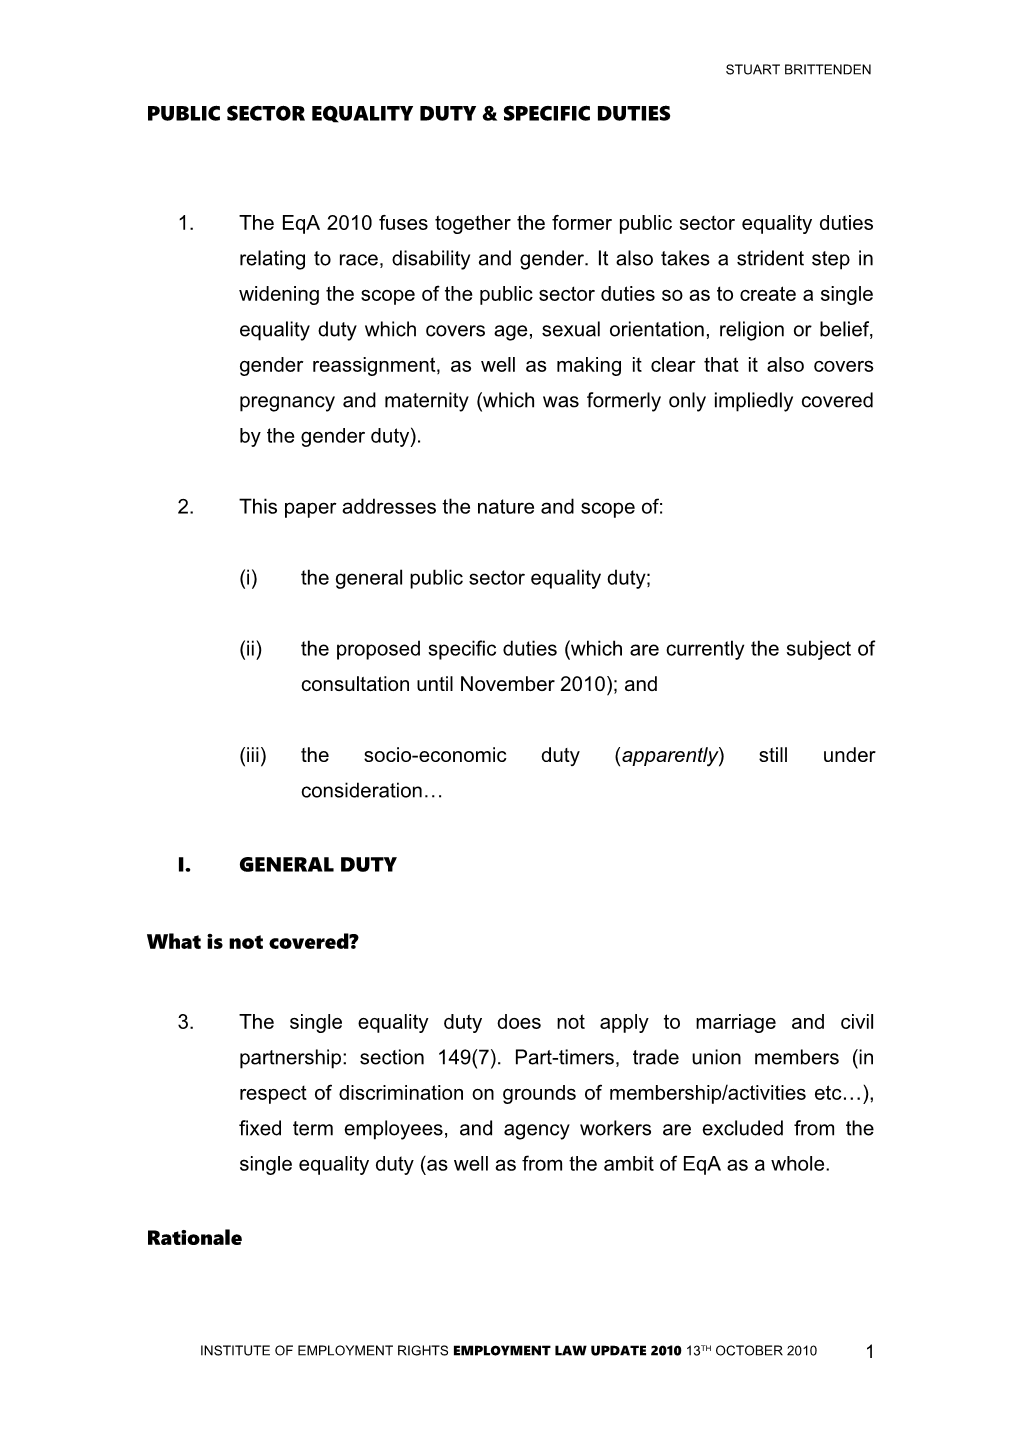 Public Sector Equality Duty & Specific Duties